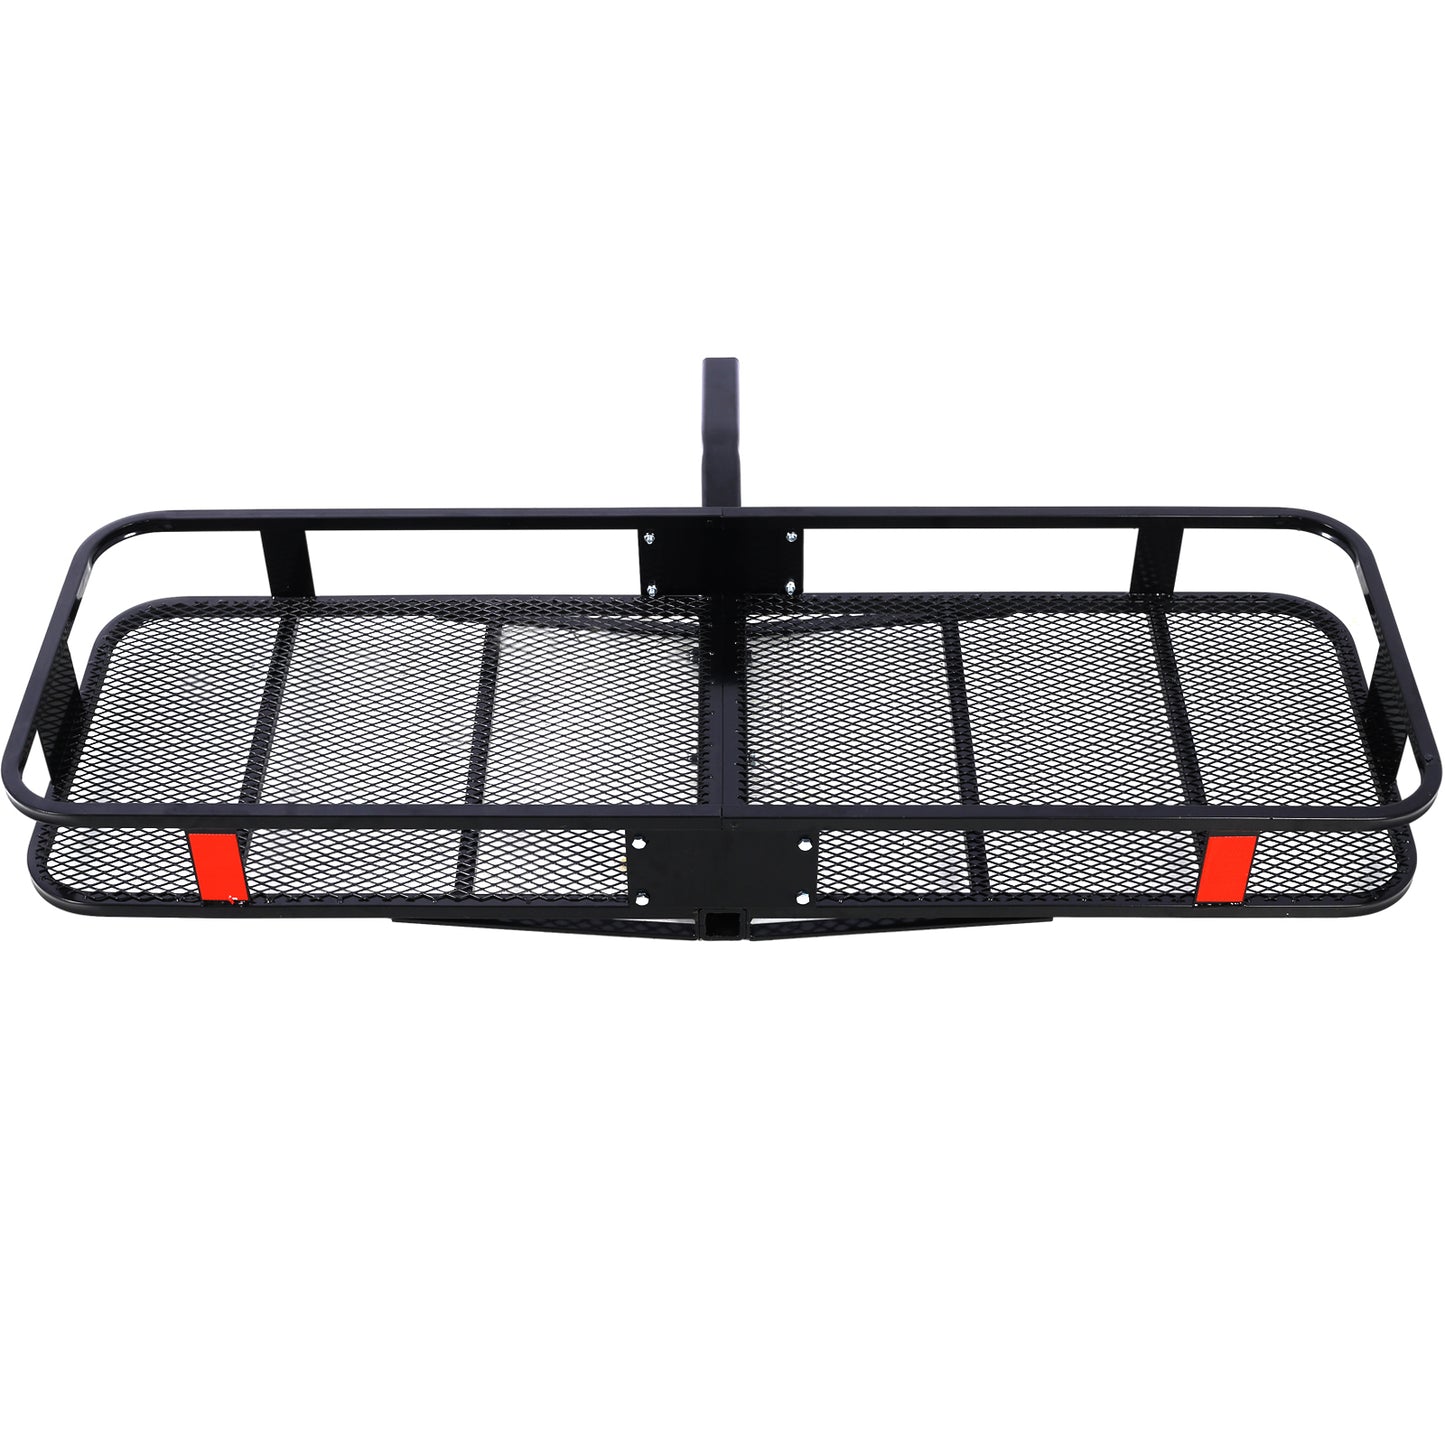 Hitch Mount Cargo Carrier Basket 60" X 21" X 6"+Waterproof Cargo Bag 16 Cubic Feet(56" 20" 20"),Hauling Weight Capacity of 500 Lbs and A Folding Arm.with Hitch Stabilizer,Net and Straps